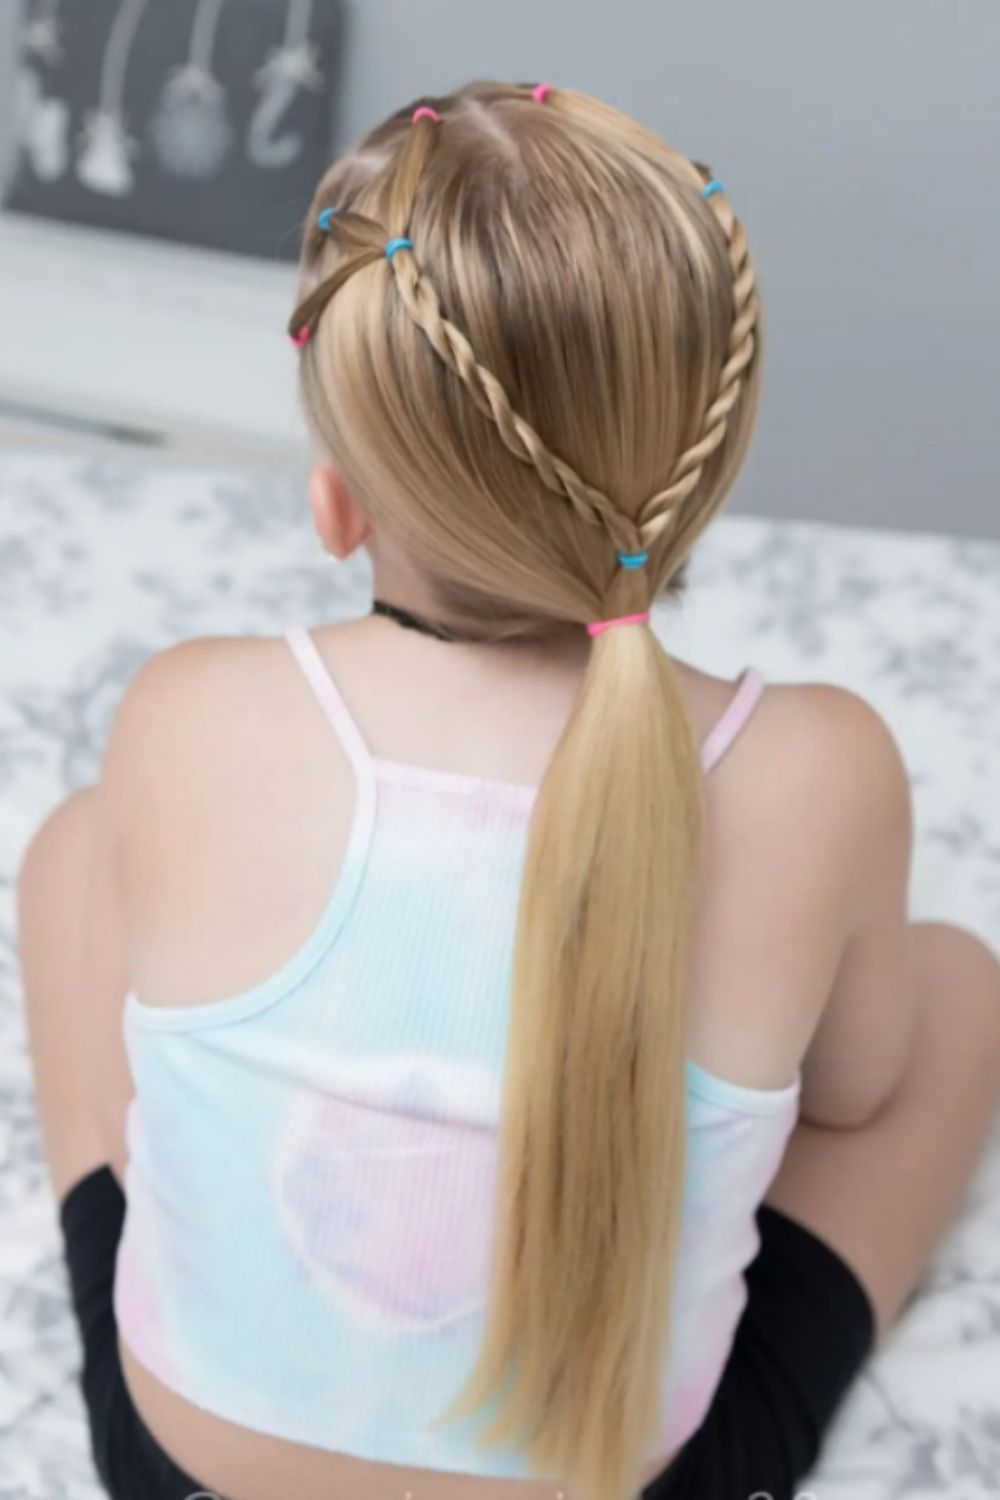 Snag Free Ponytail Holders Are A Must